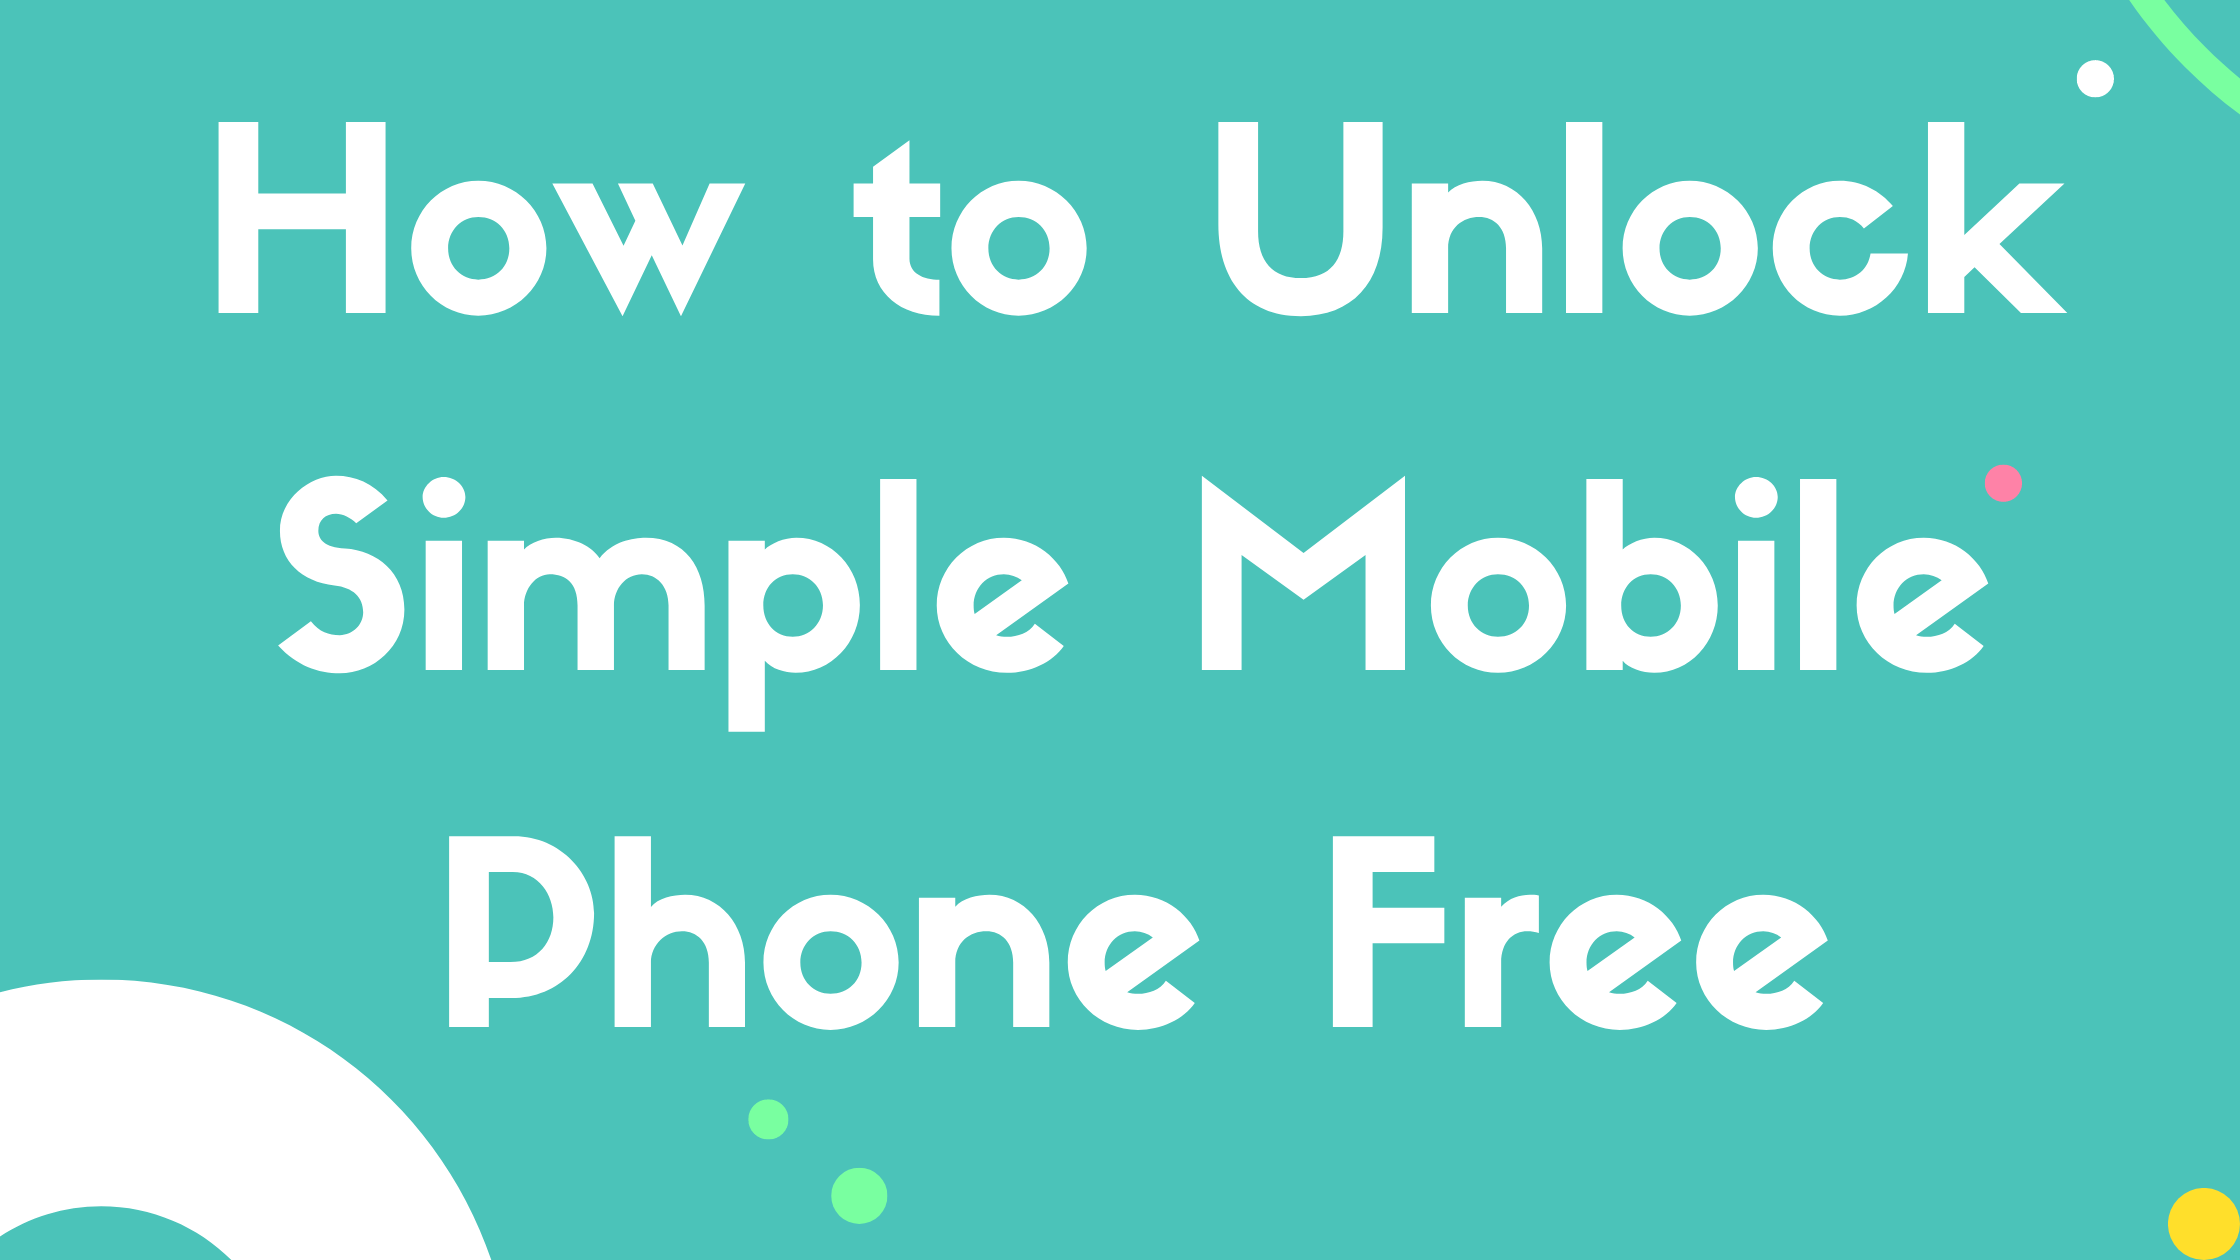 How to Unlock Simple Mobile Phone Free in 2023